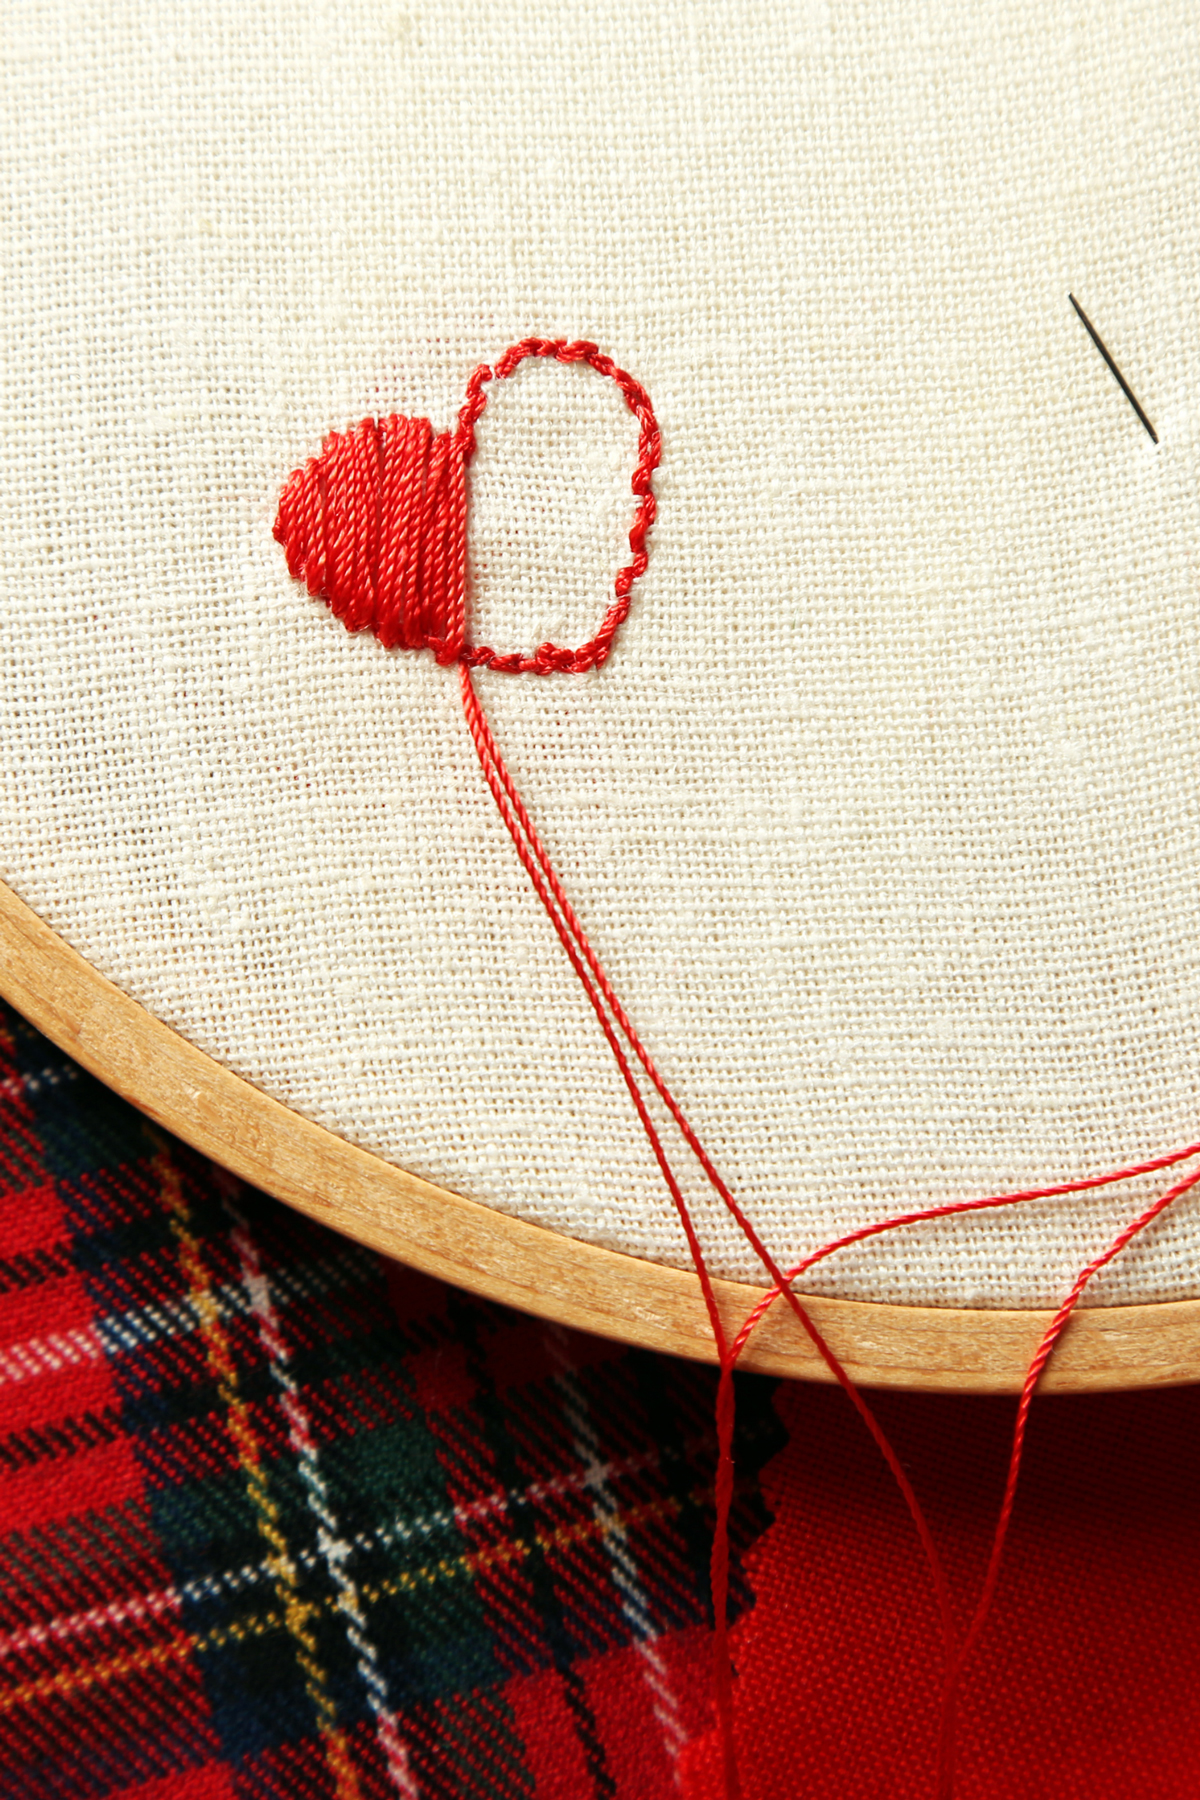 Small heart embroidery